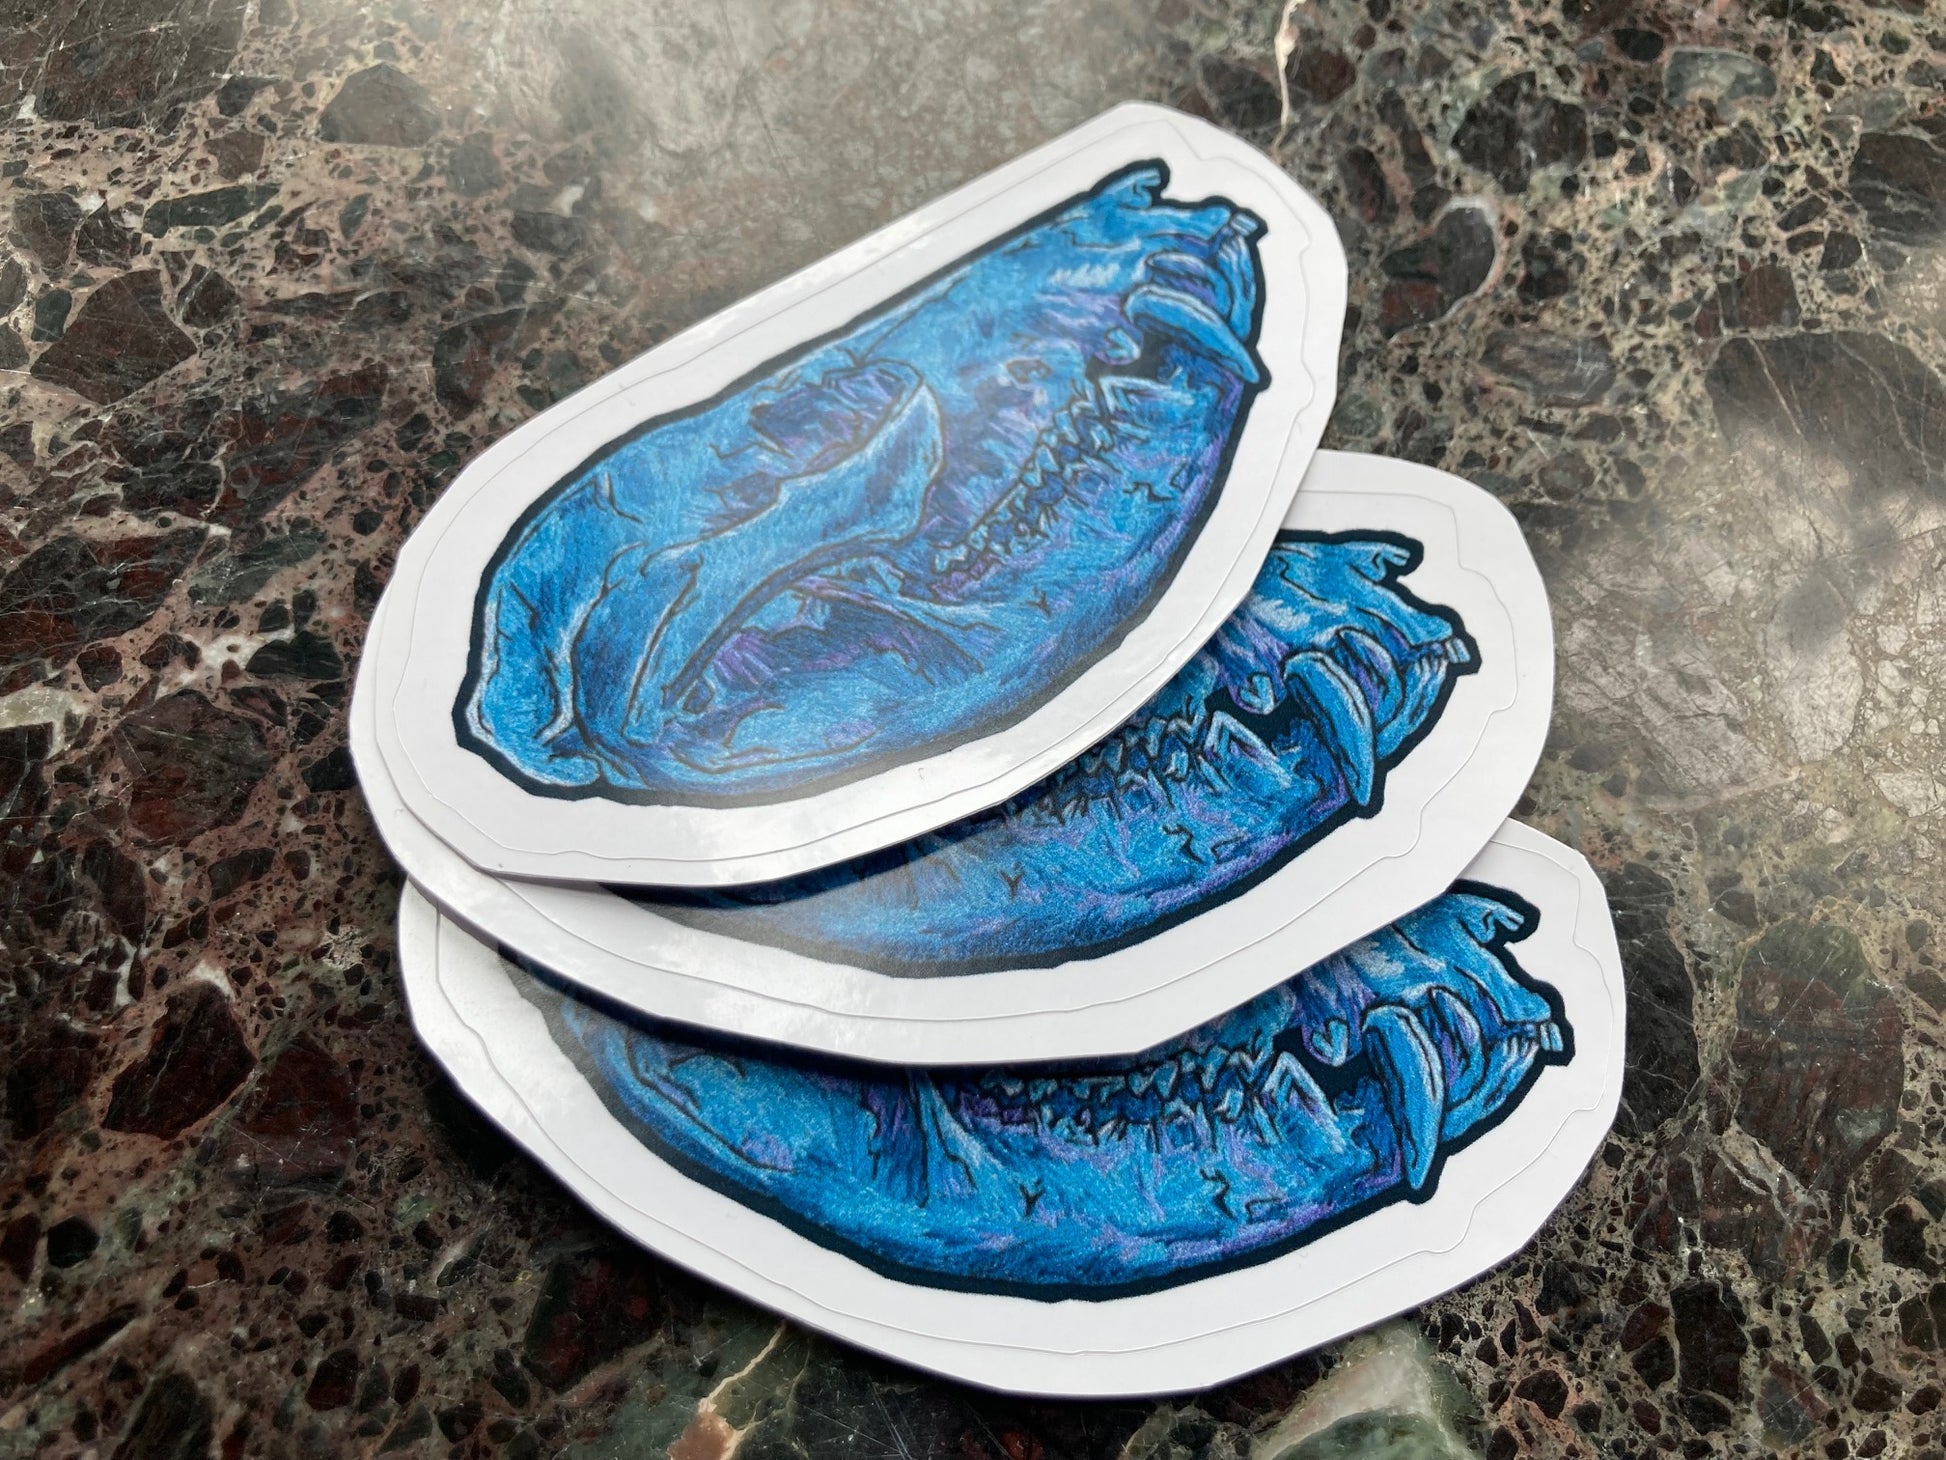 a pile of stickers with an image of an embroidered opossum skull in blue and purple tones sits on a dark surface. 